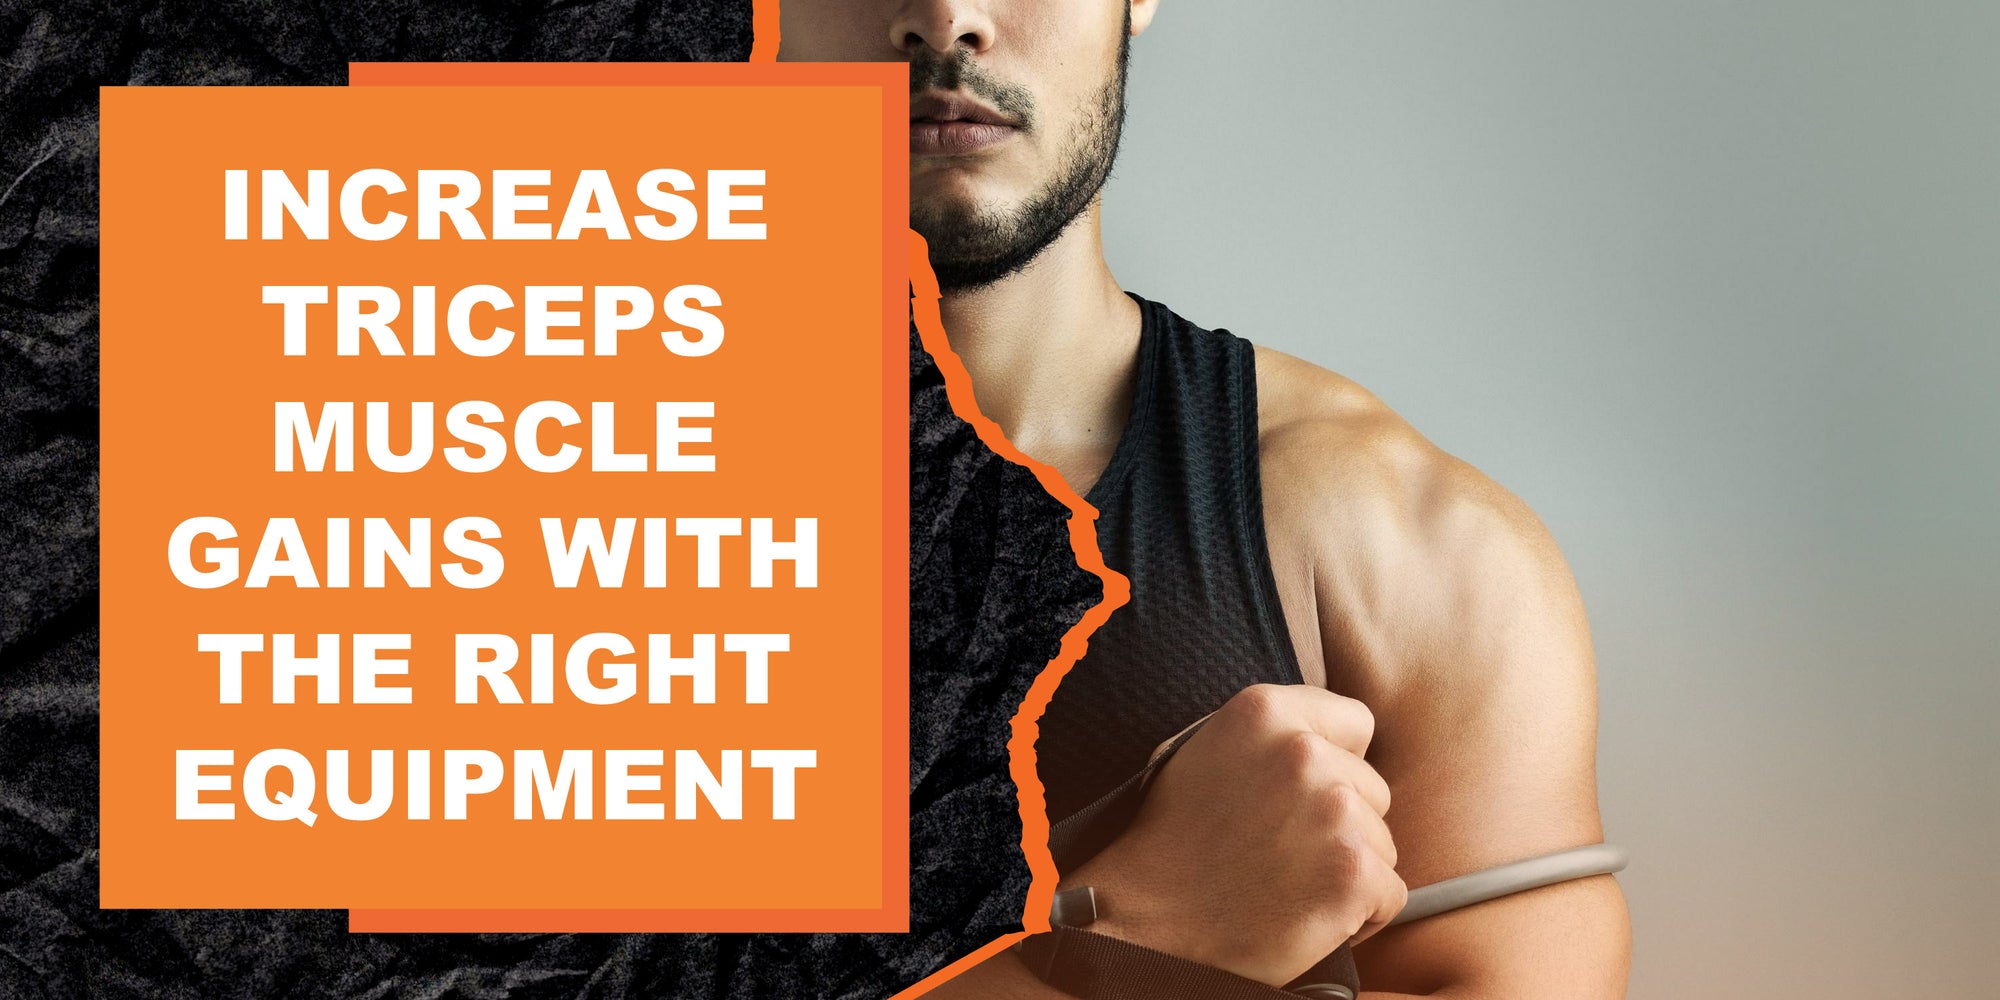 How to Increase Triceps Muscle Gains with the Right Fitness Equipment